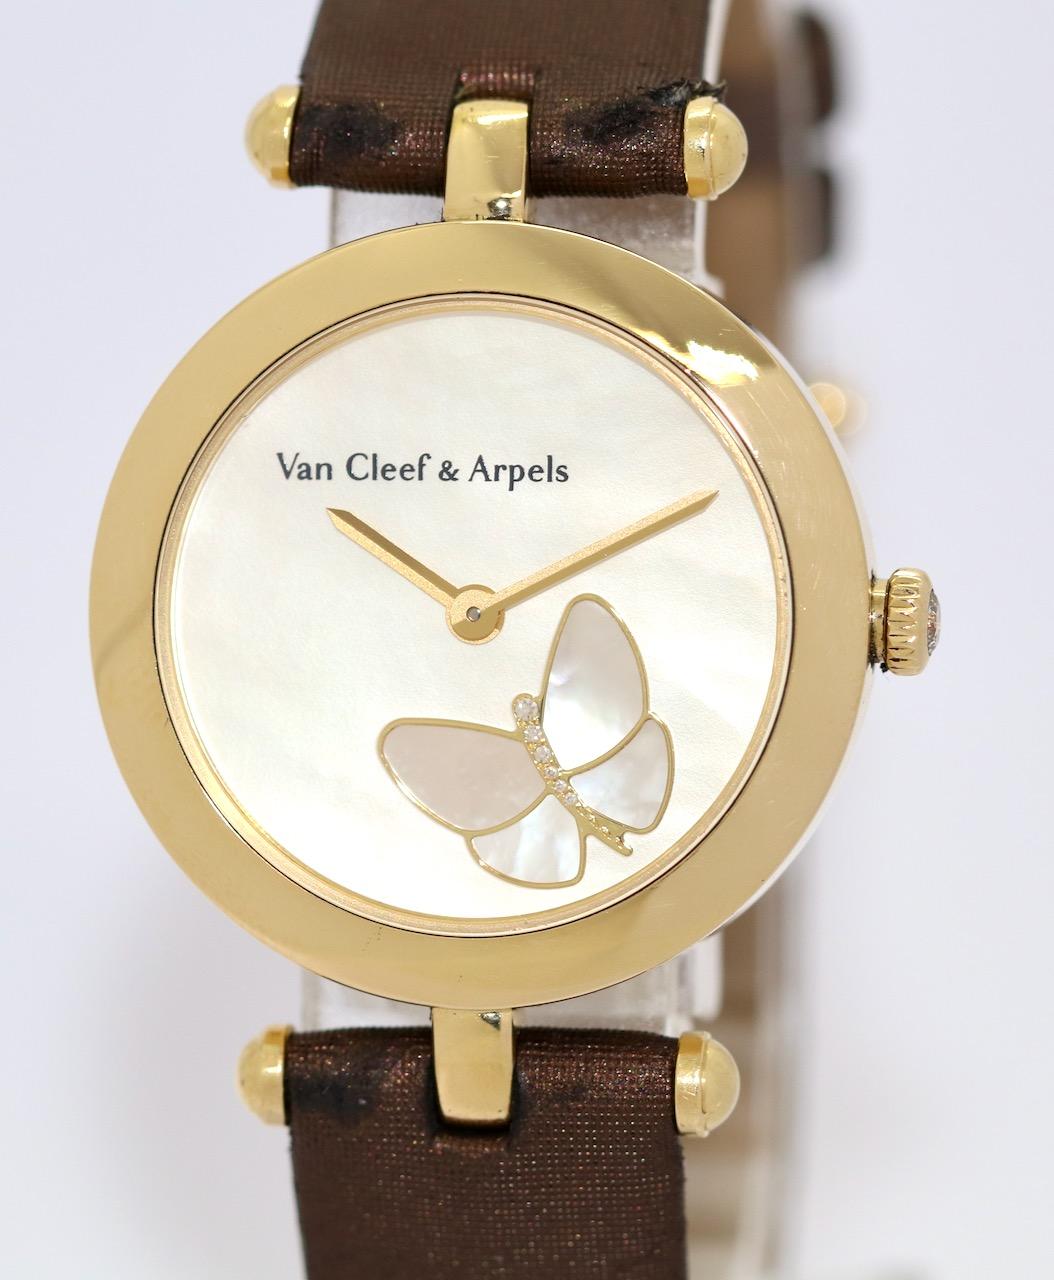 Van Cleef & Arpels Ladies Wristwatch, Lady Arpels Papillon, 18K Gold, MOP (Mother of Pearl) Dial and Diamonds.

Strap and 18K gold clasp also original VCA.
Strap with signs of wear.

Includes original case and certificate of authenticity from our